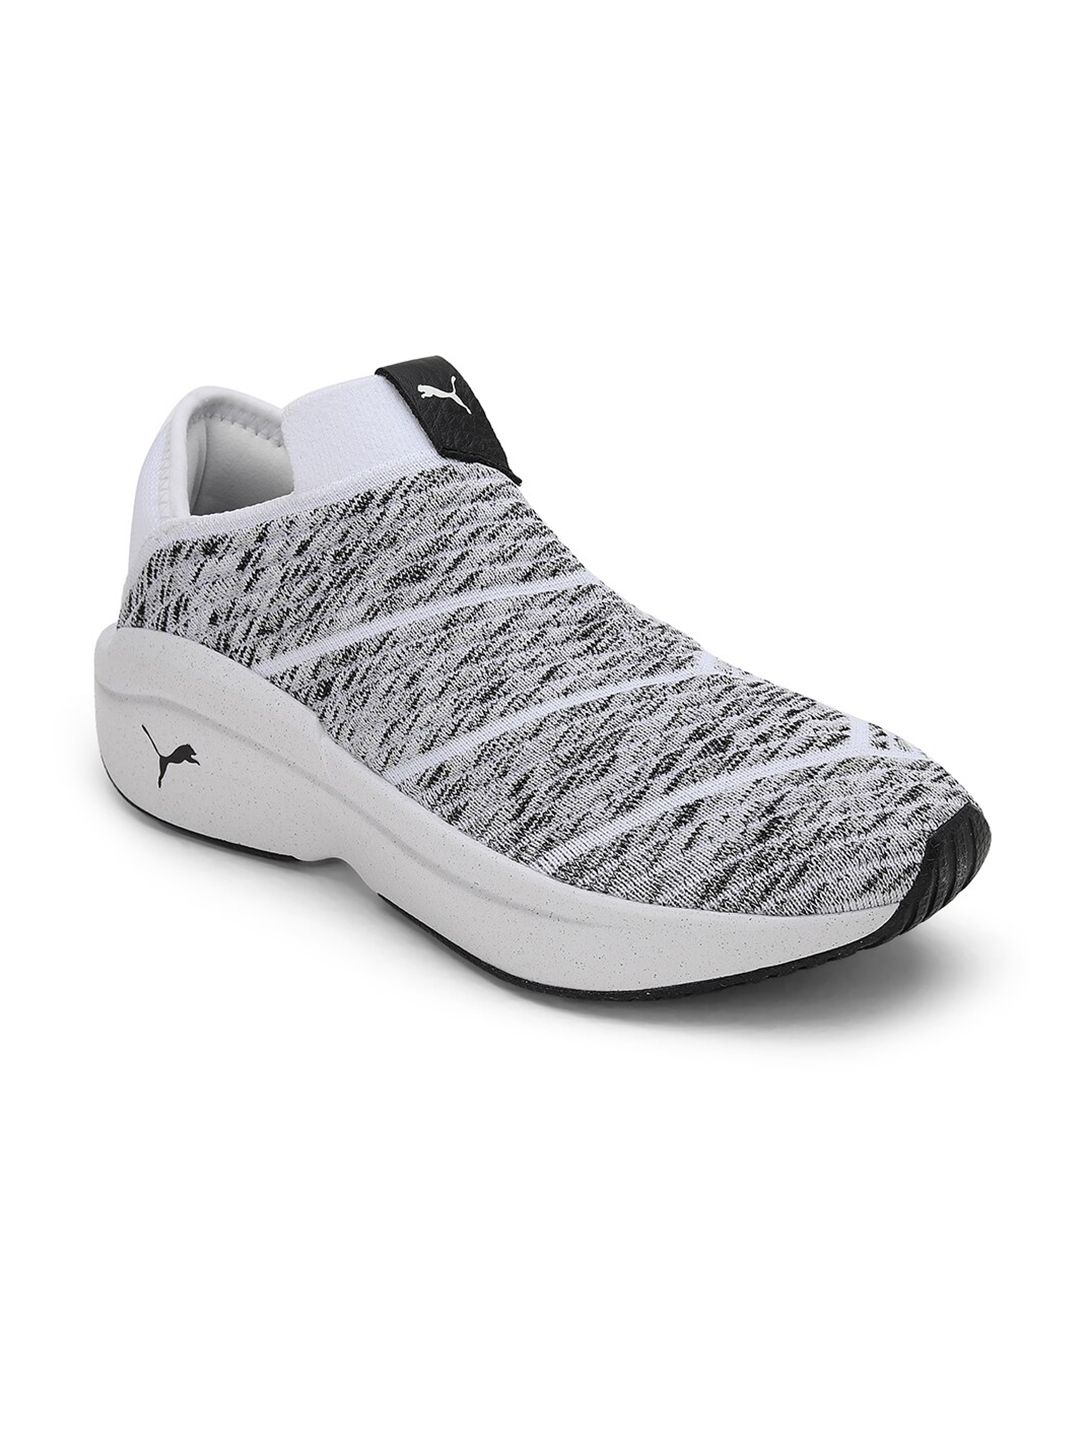 Puma Women Enlighten Training or Gym Shoes Price in India